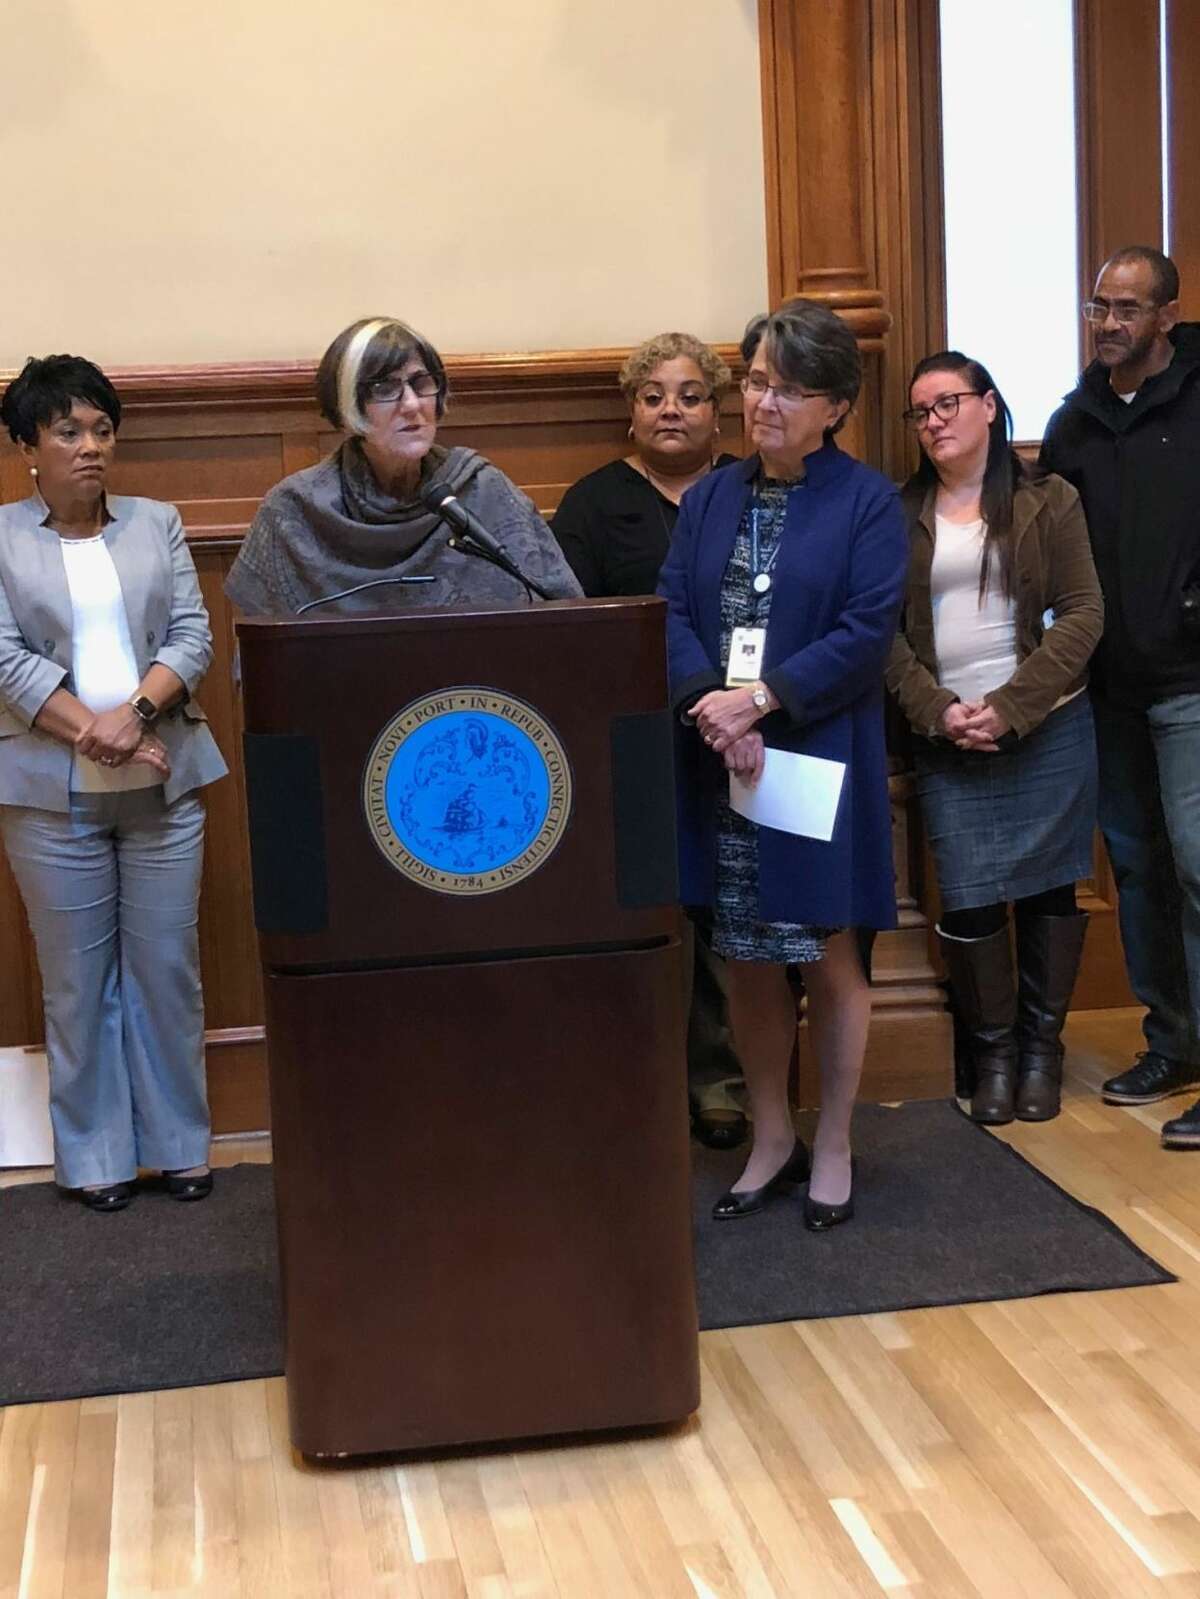 U.S. Rep. Rosa DeLauro, D-3, at podium, reminds residents to sign up for the Affordable Care Act. Far right is Pedro Garcia, who was able to get retroactive coverage when he discovered he had a heart issue. He is next to his wife, Marisol Velez.